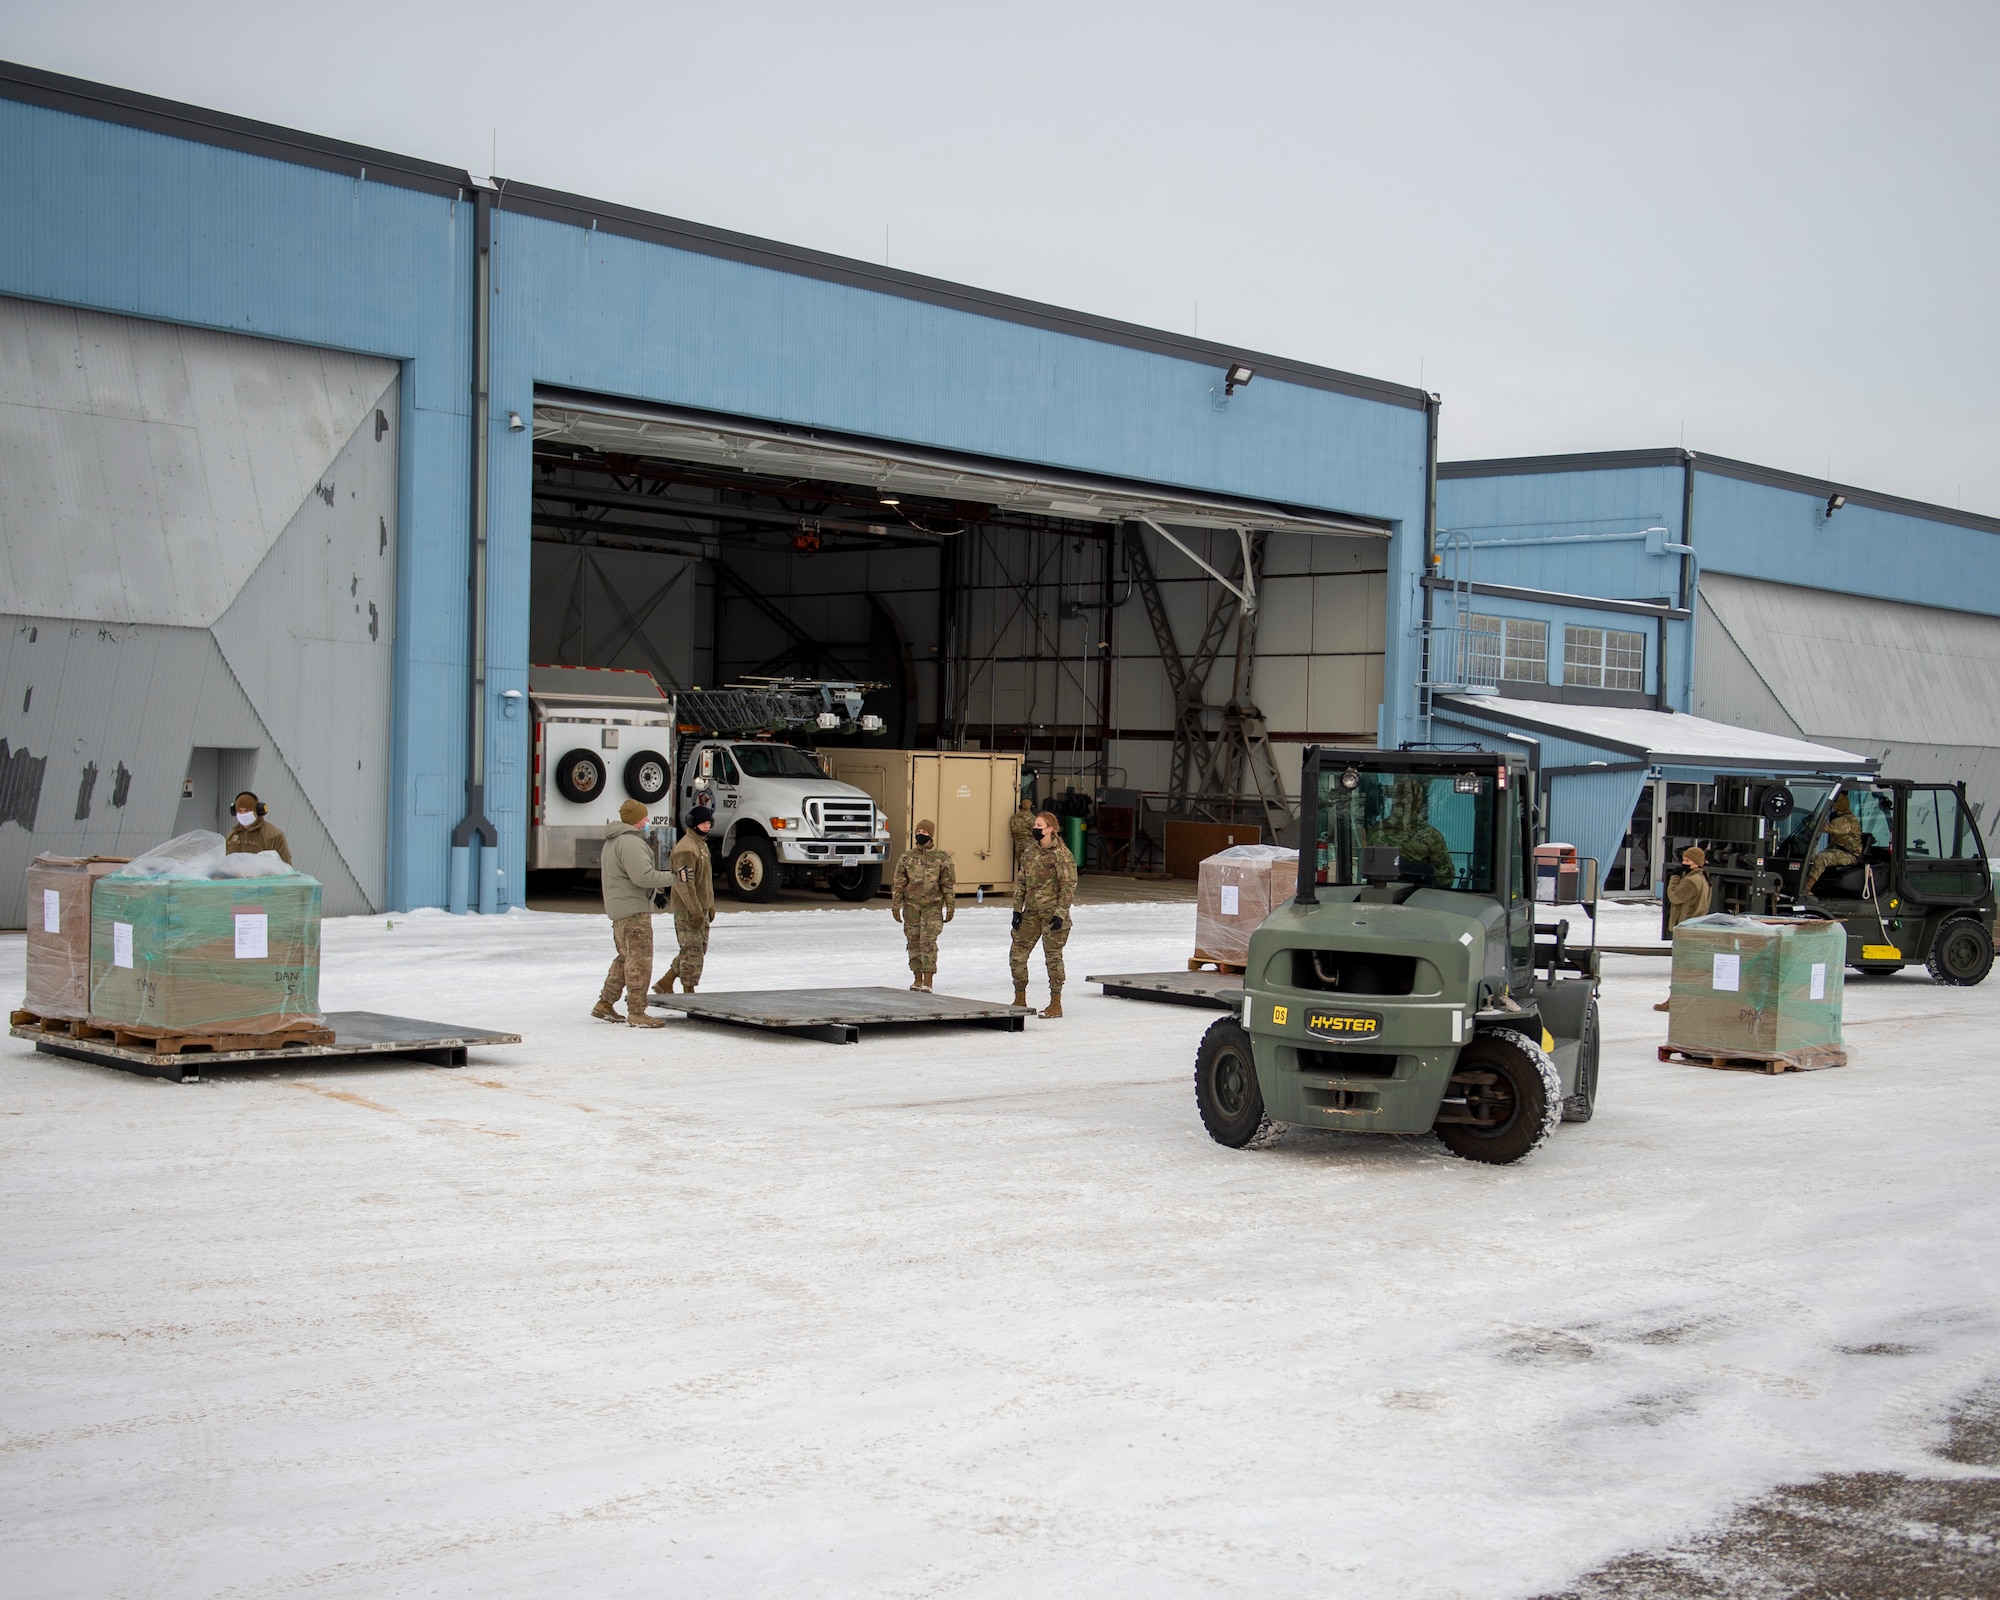 U.S. Air Force Airmen with the 133rd Air Transportation Function move an estimated 11,300 pounds of medical equipment onto eight pallets during cargo buildup in St. Paul, Minn., Jan. 08, 2022.